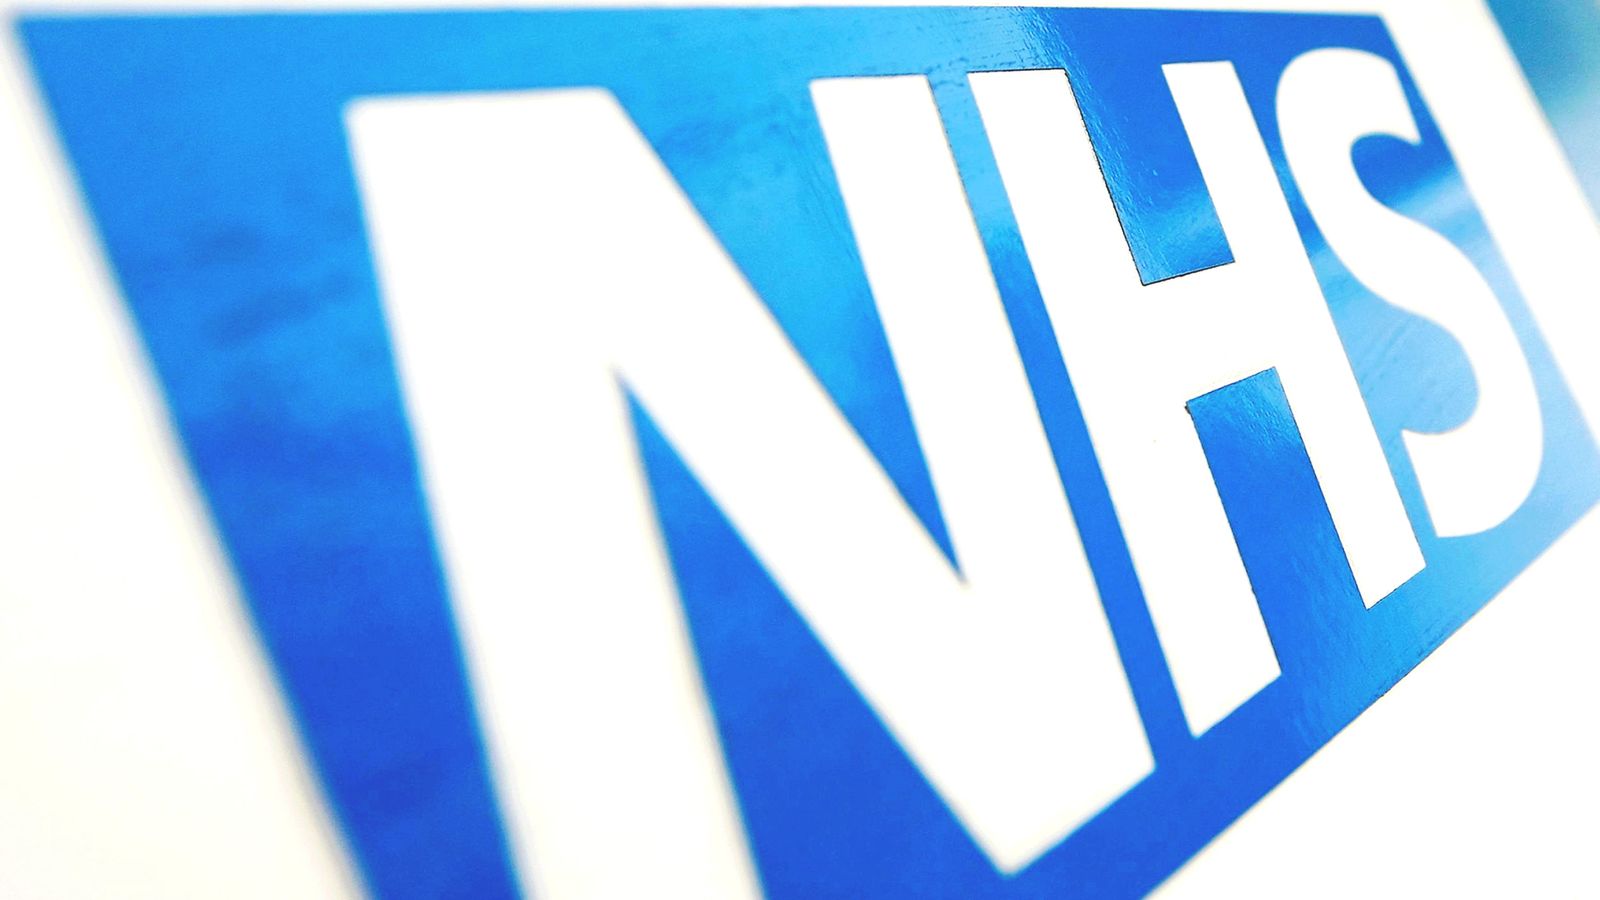 Spending cuts made necessary by mini-budget 'could finish NHS', former Bank of England deputy governor Sir Charlie Bean says